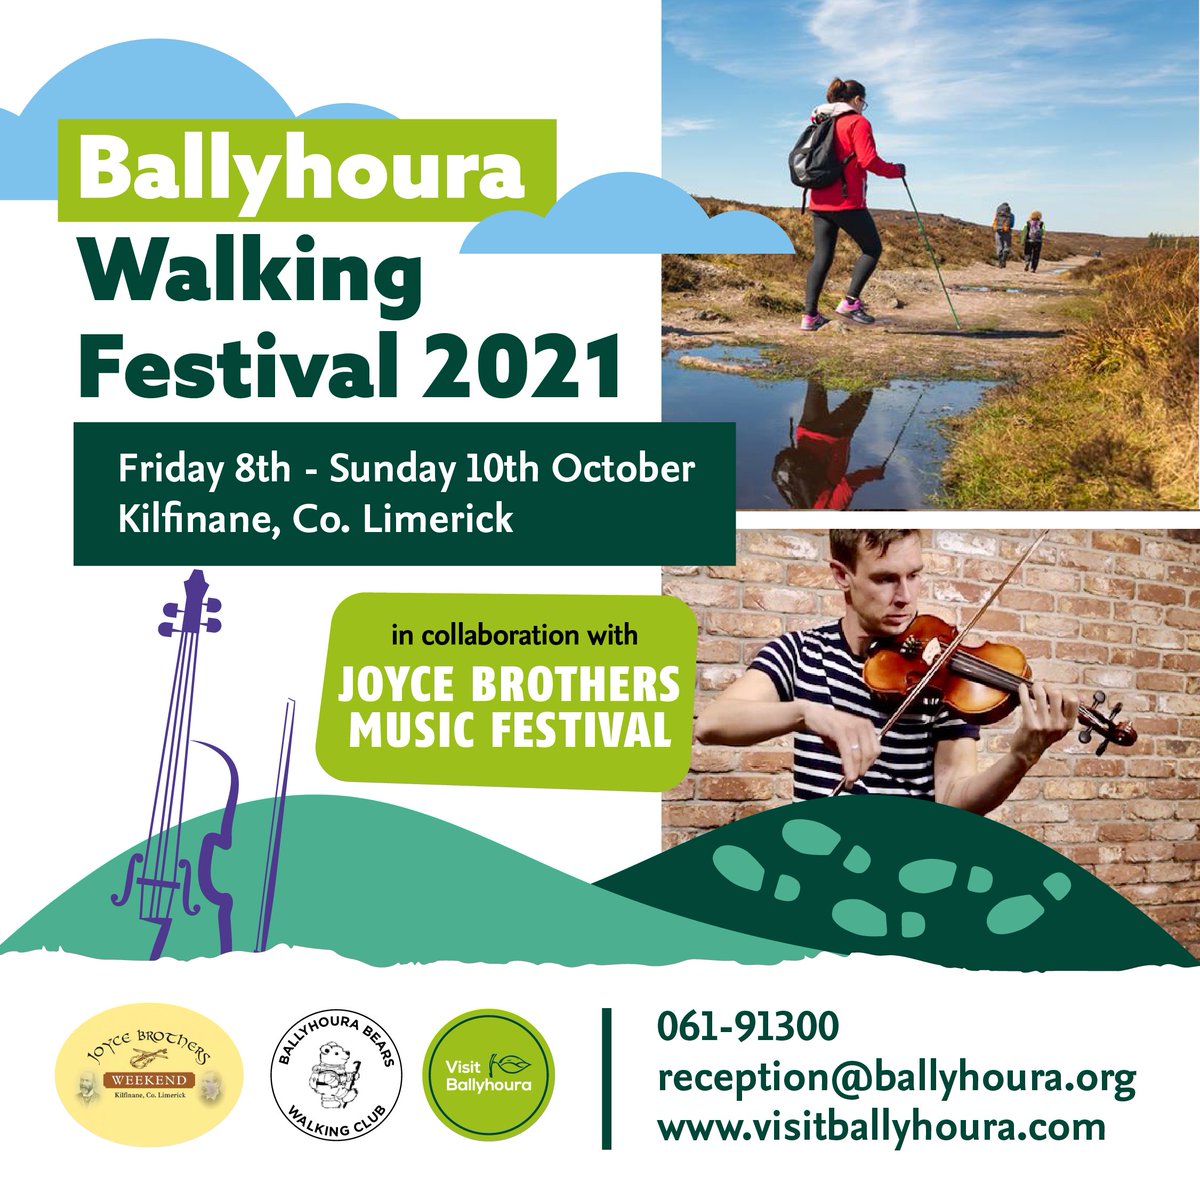 📆Save the date!
Ballyhoura Walking Festival 2021 🥾 in collaboration with Joyce Brothers Music Festival 🎻is taking place from the evening of Friday 8th to Sunday 10th October in Kilfinane, Co. Limerick. Watch this space!! #walkingfestival #musicfestival #visitballyhoura